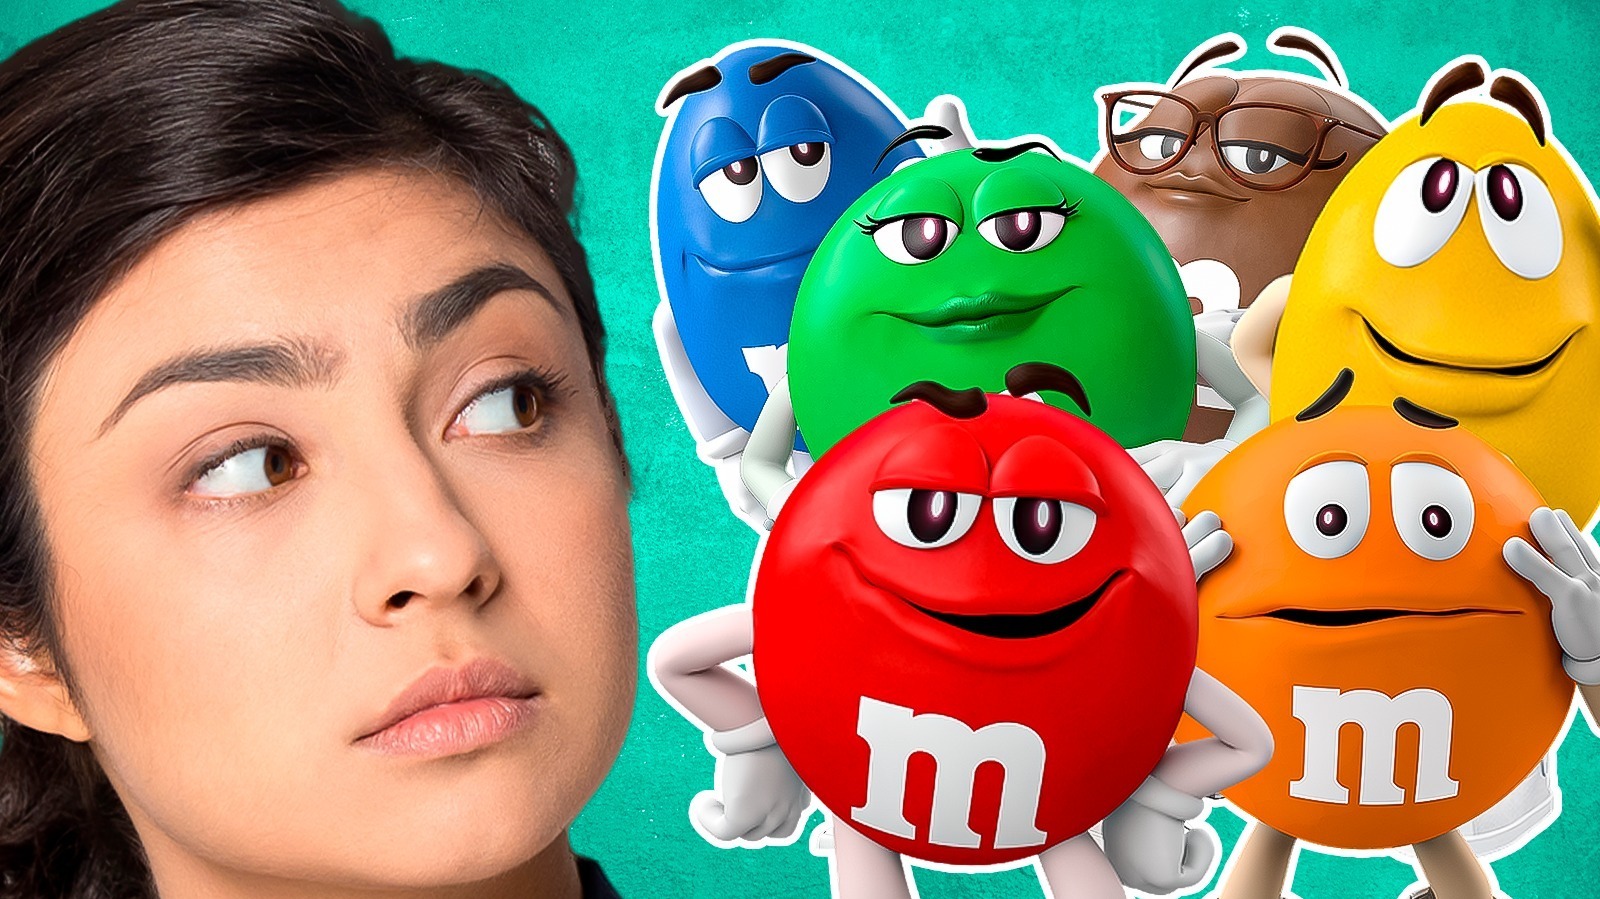 M&M'S Characters - Red